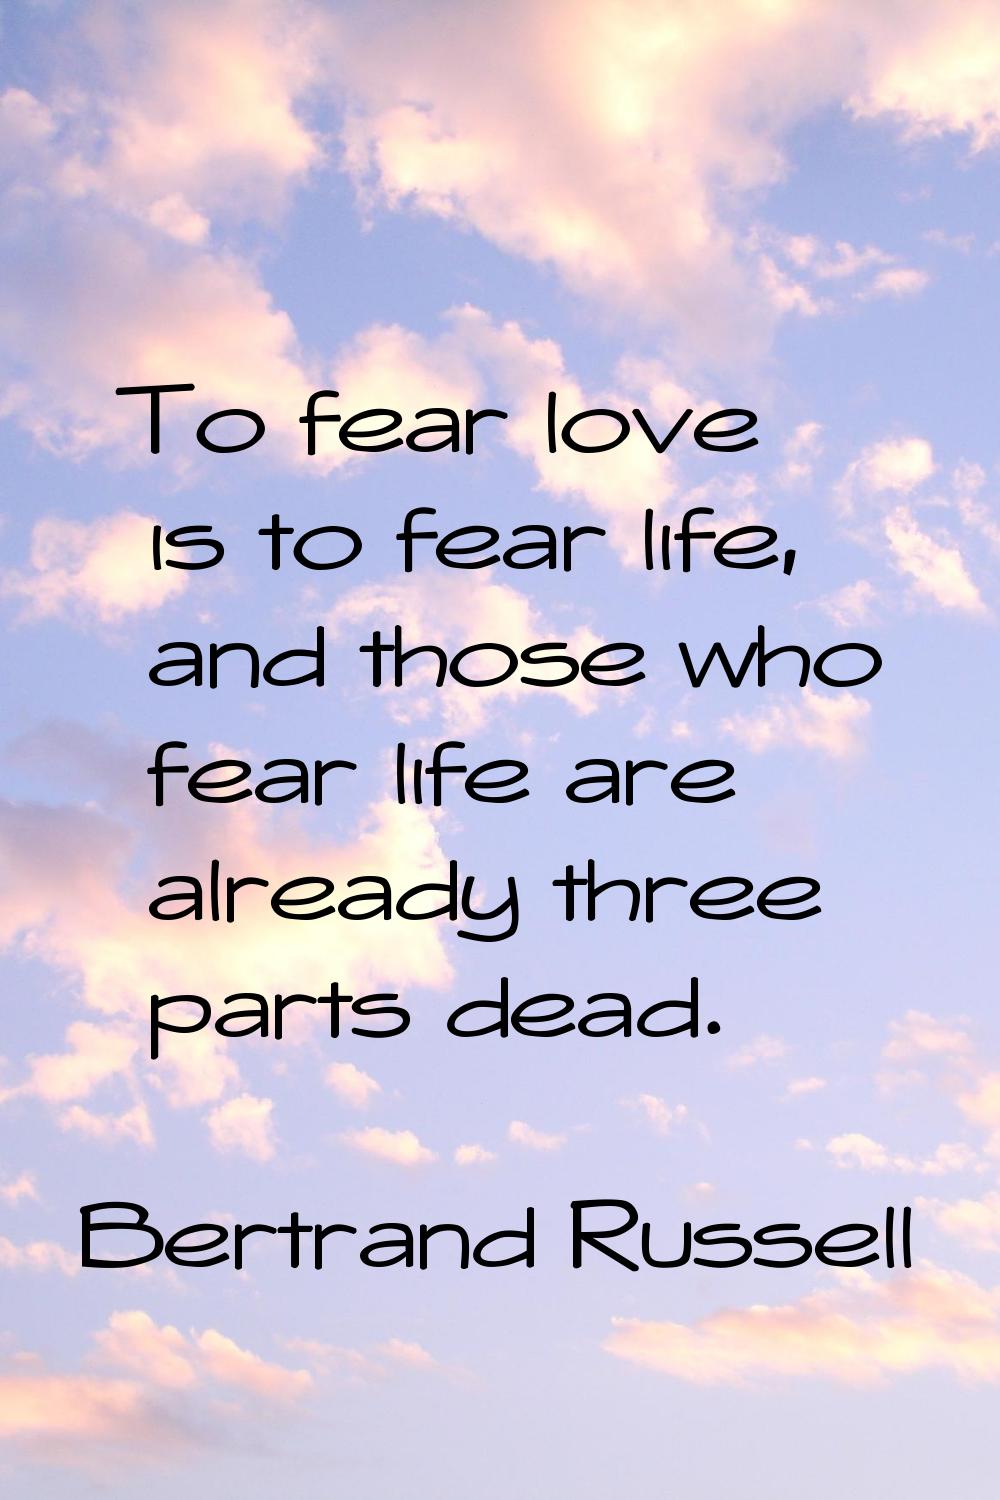 To fear love is to fear life, and those who fear life are already three parts dead.